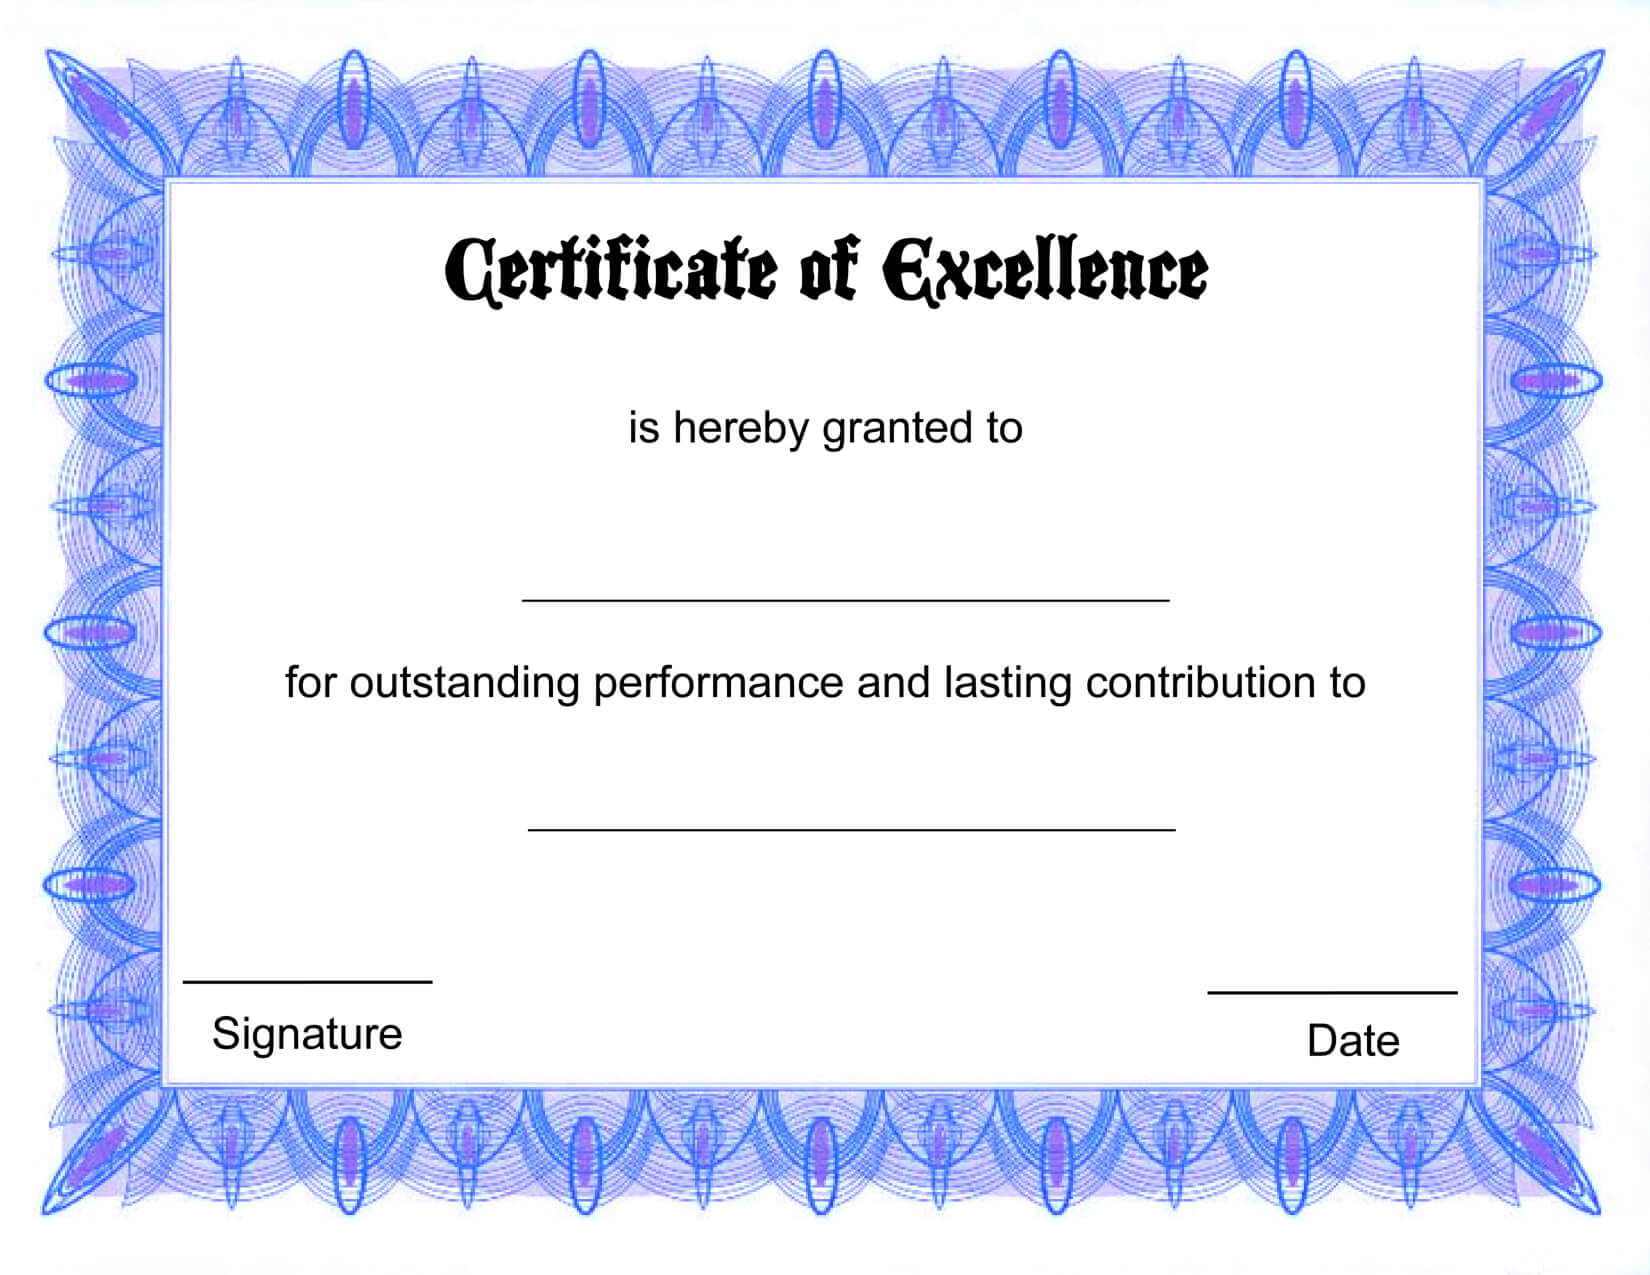 Blank Certificate Templates Of Excellence | Kiddo Shelter Regarding Free Certificate Of Excellence Template